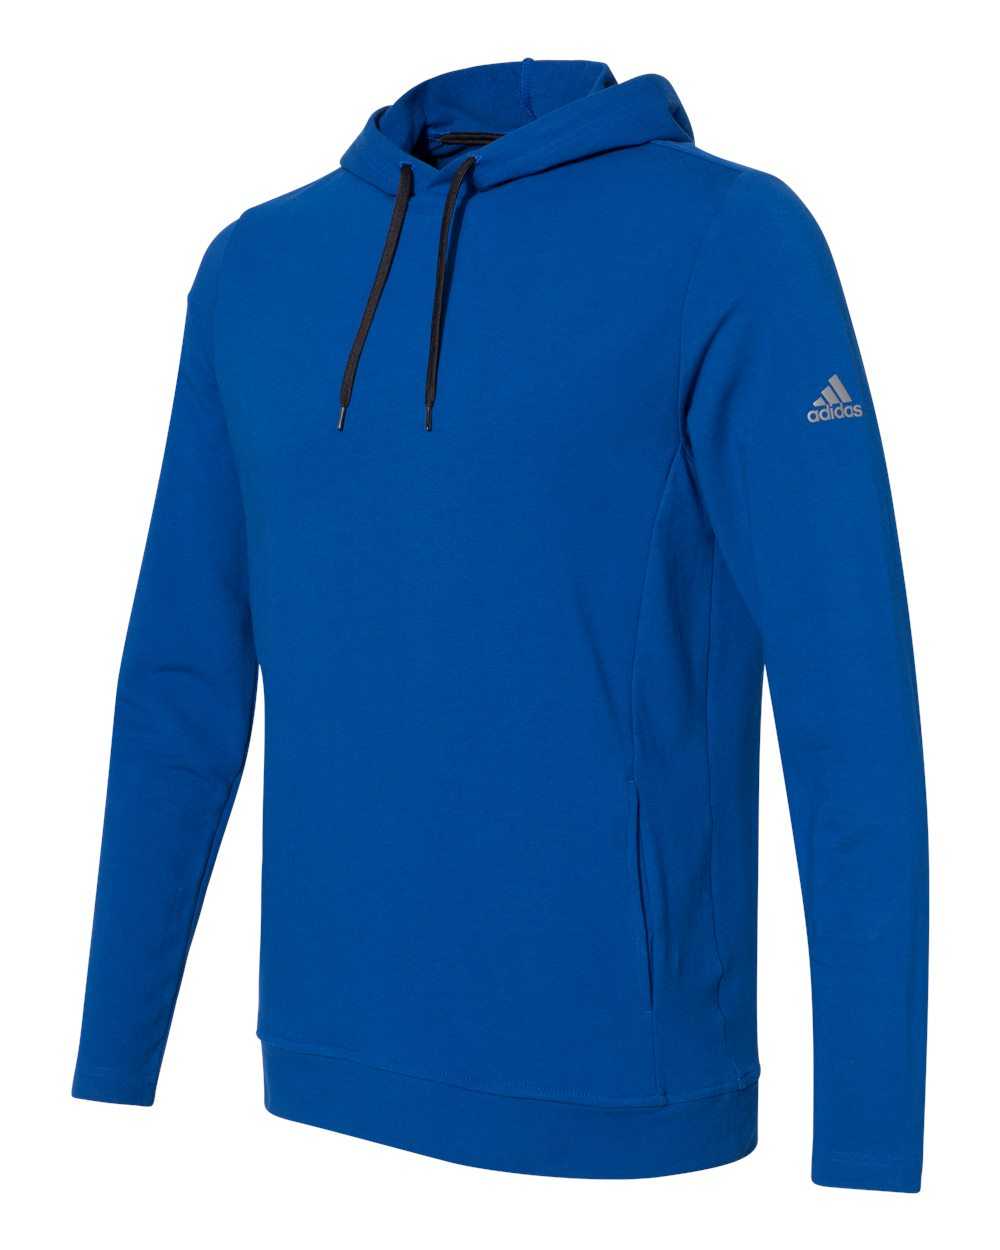 Adidas A450 Lightweight Hooded Sweatshirt - Collegiate Royal - HIT a Double